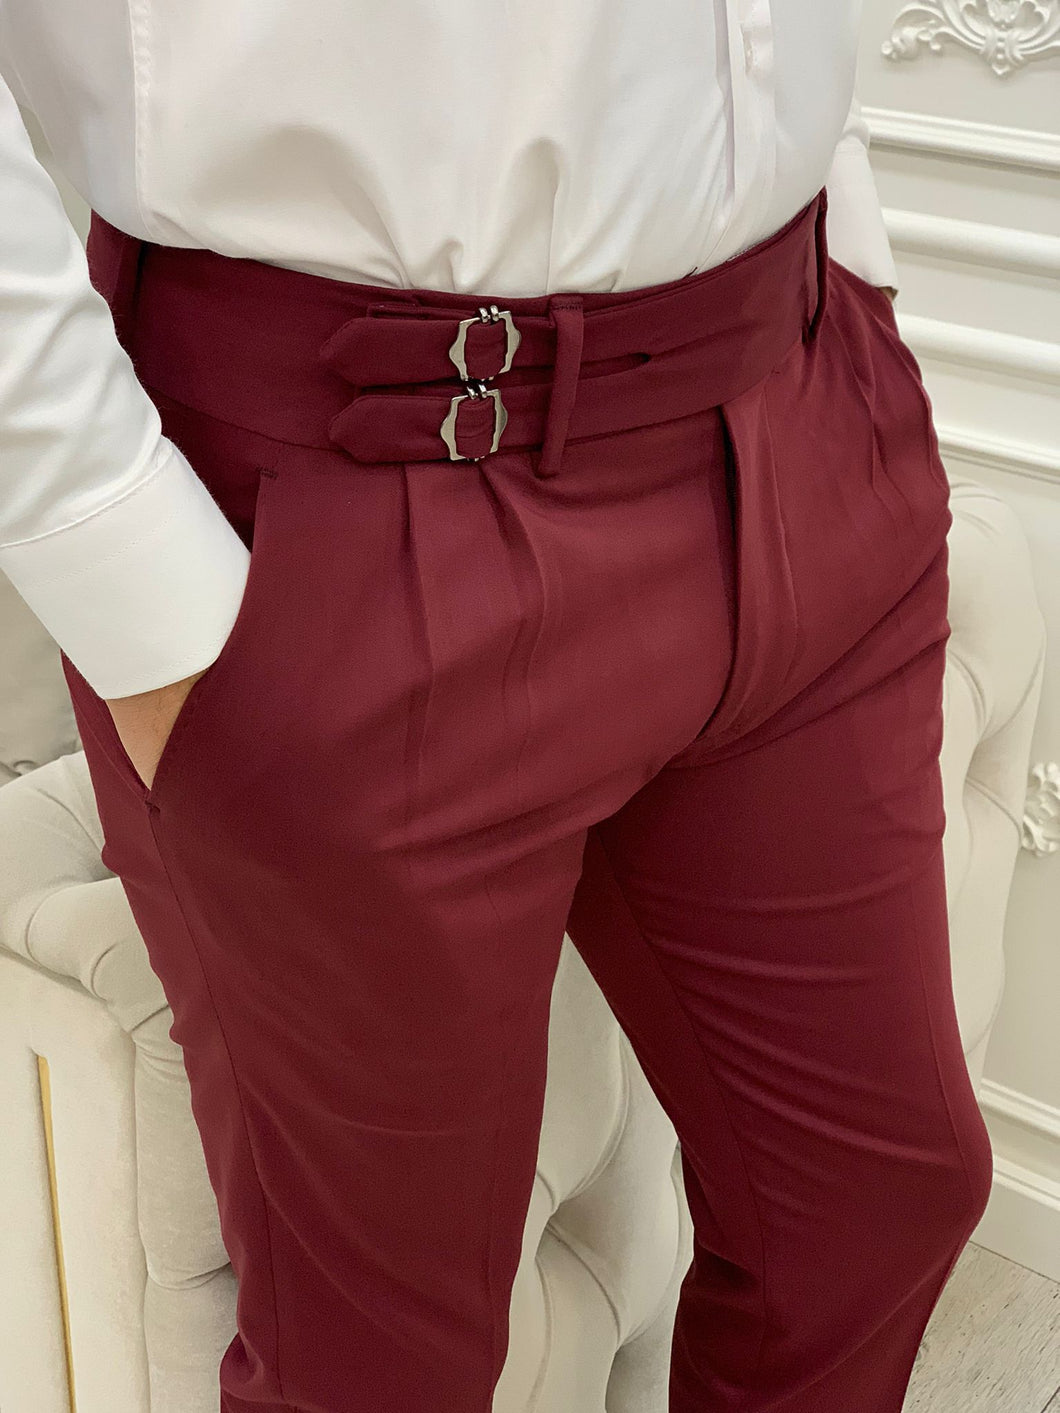 Buy Burgundy Slim Fit Pants by GentWith with Free Shipping  Red pants men Slim  fit pants Slim fit cotton pants